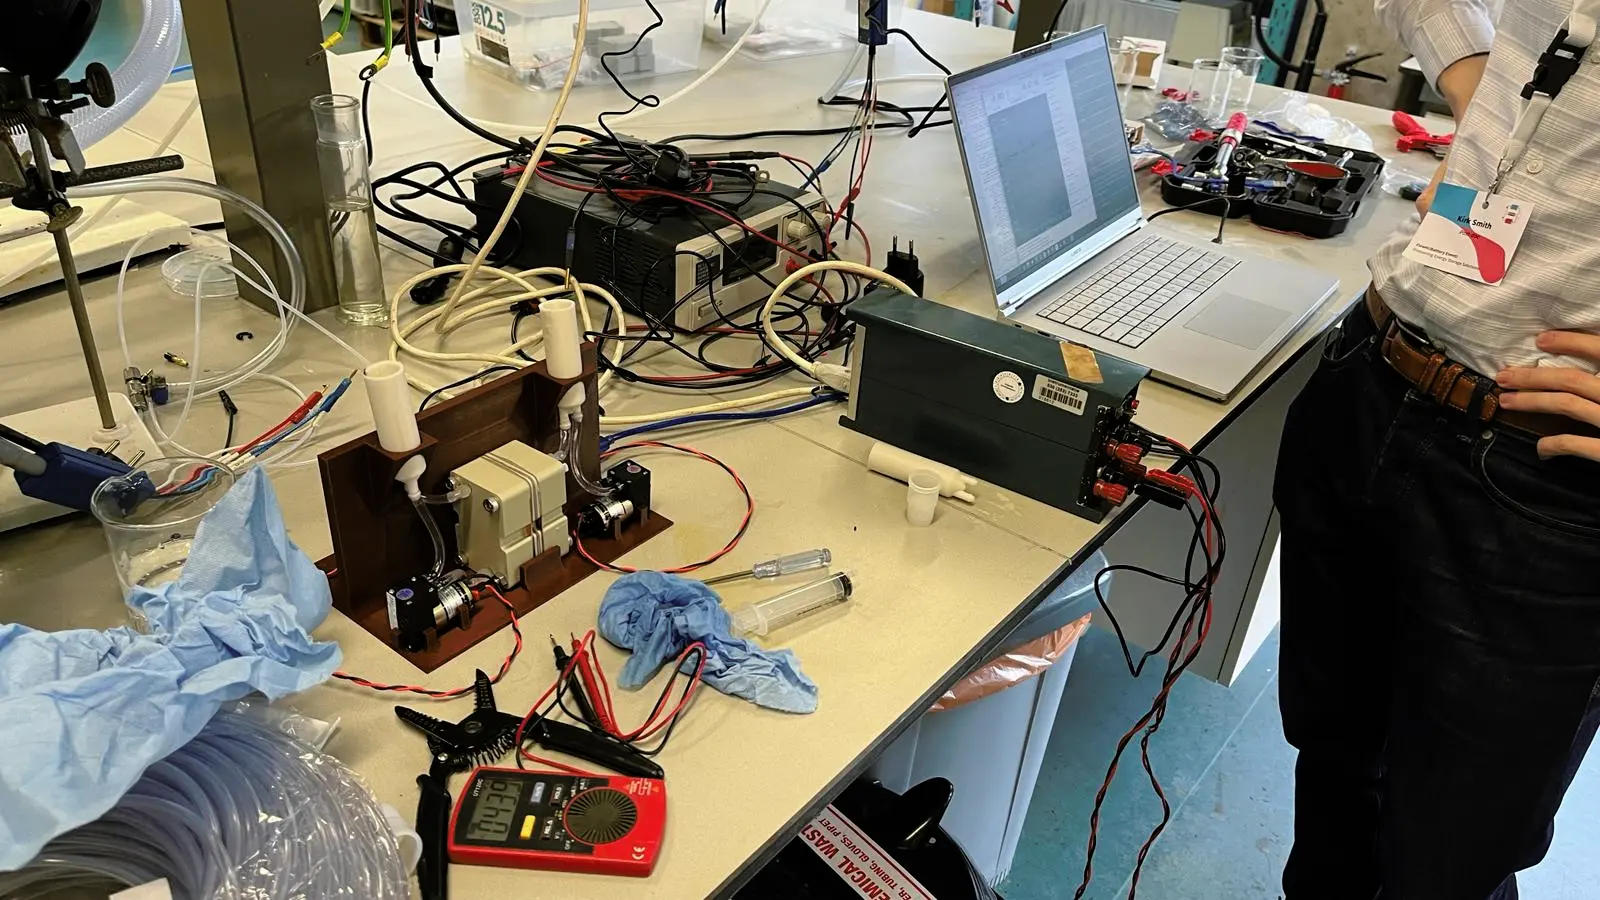 Flow battery test cell in jig on lab bench, with multimeter, power supply, and laptop nearby